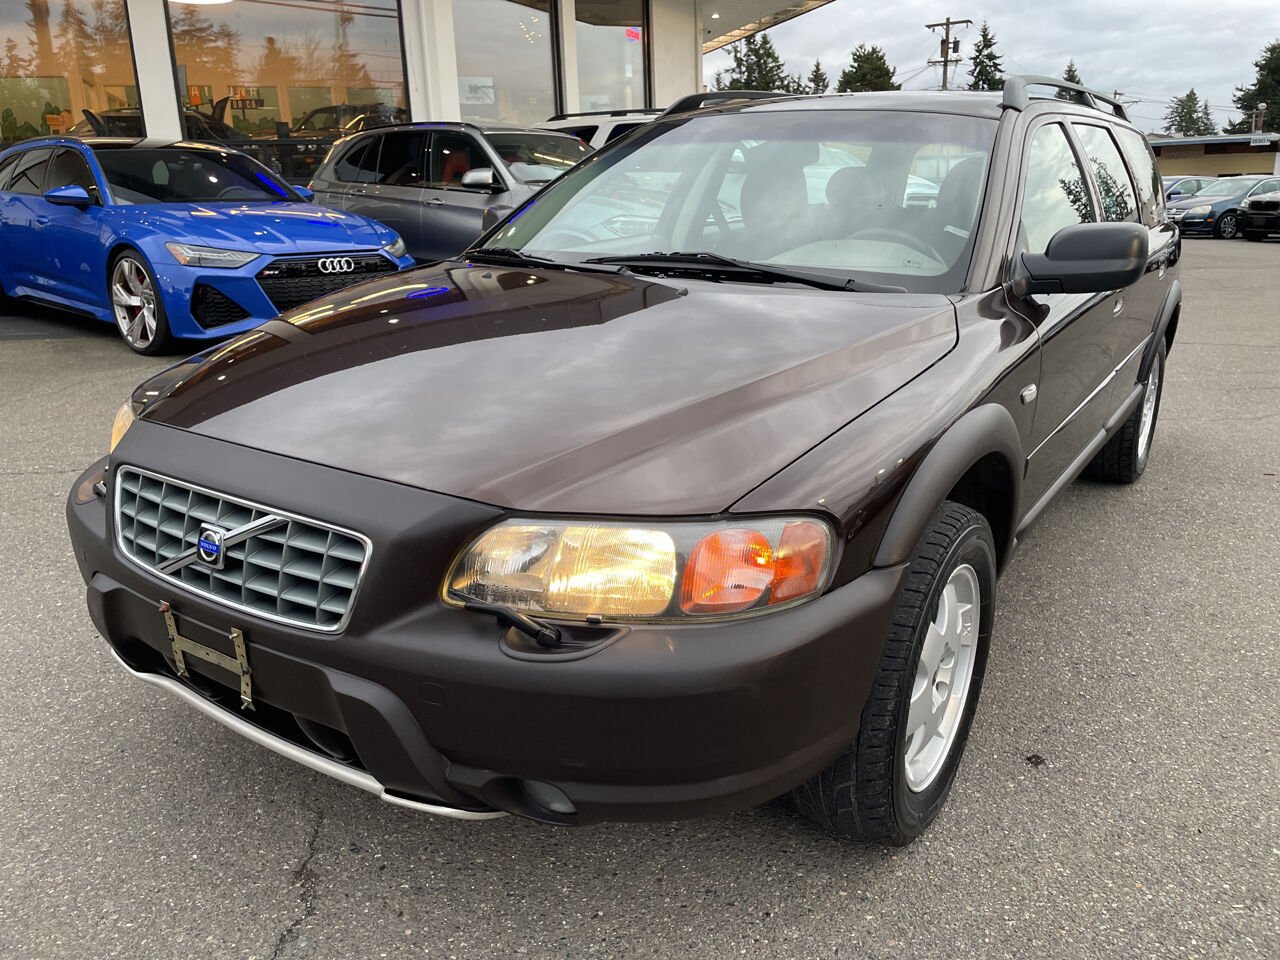 Used 2001 Volvo V70 for Sale Right Now - Autotrader